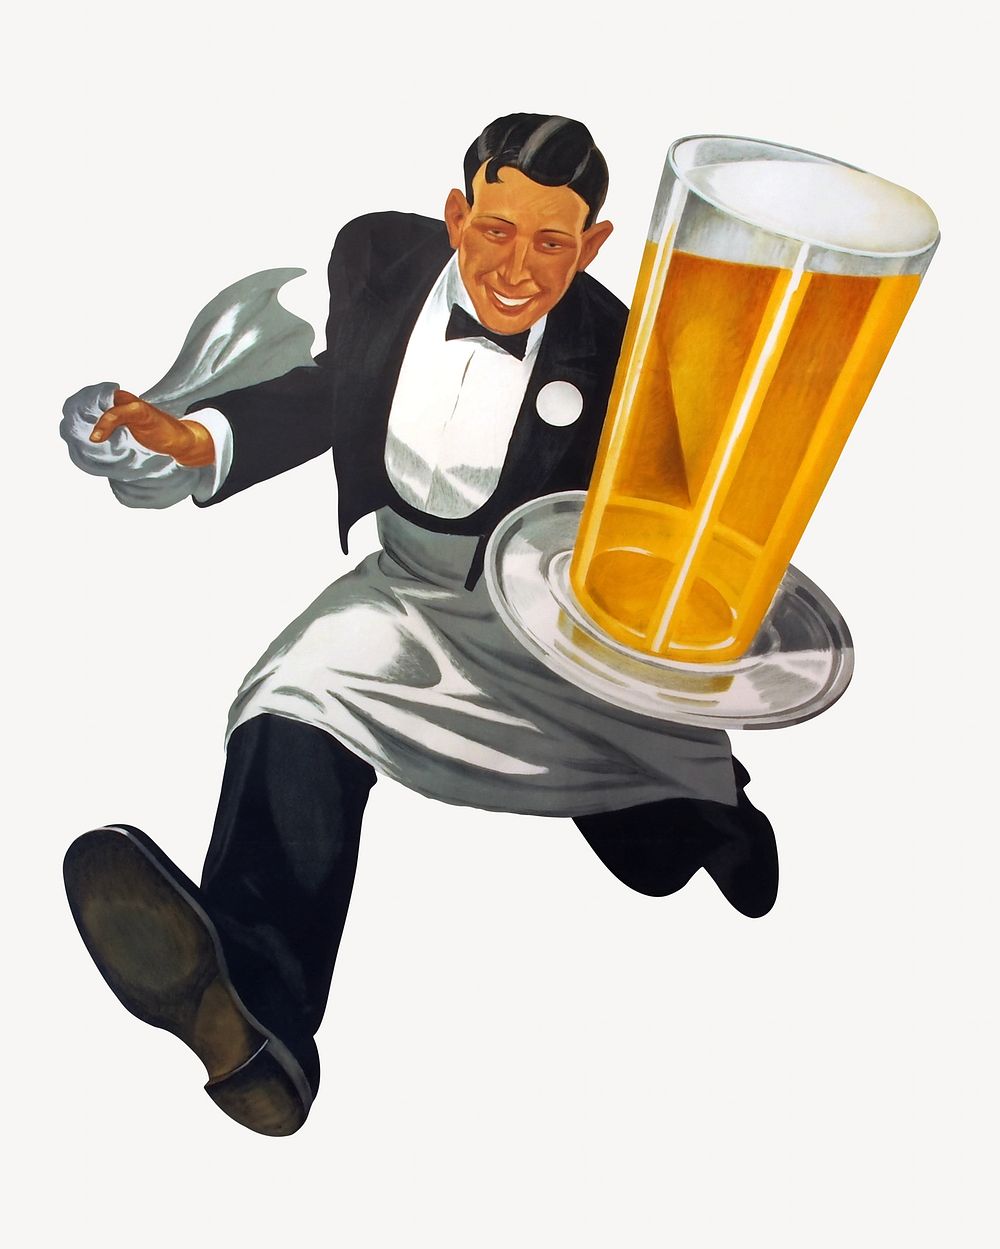 Vintage man serving beer, chromolithograph illustration. Remixed by rawpixel. 